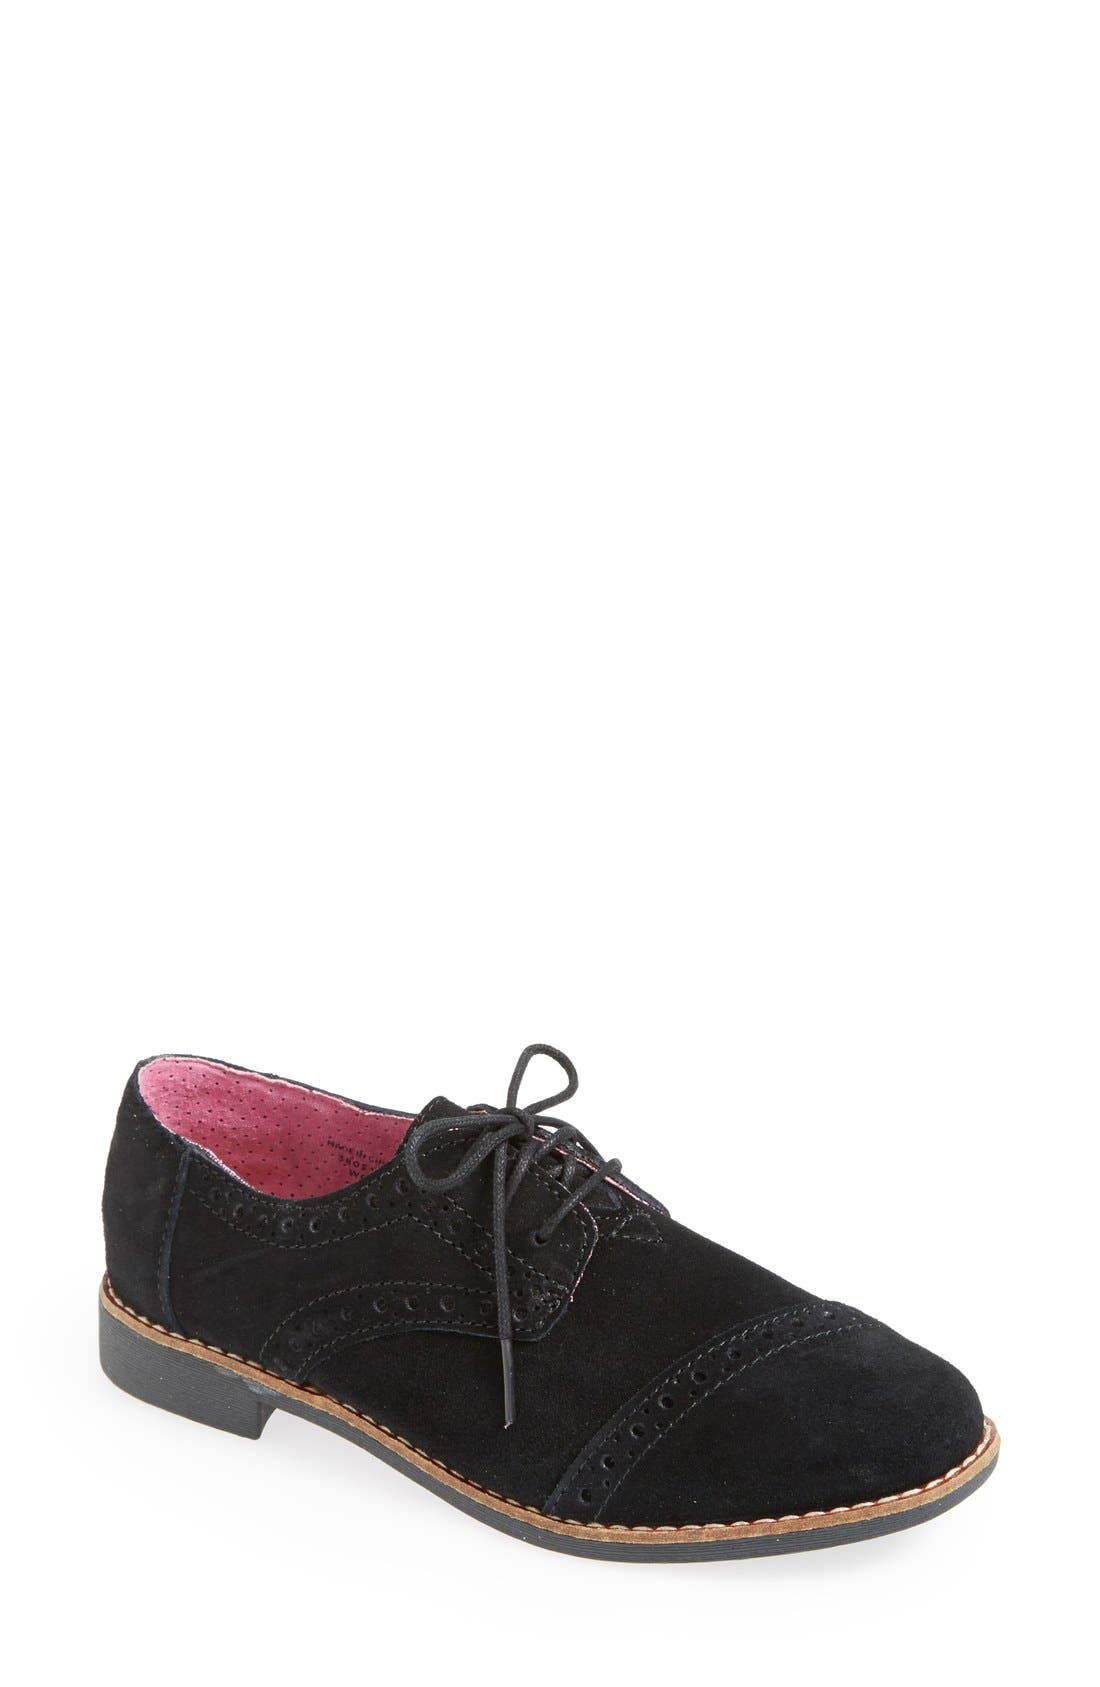 toms oxfords womens